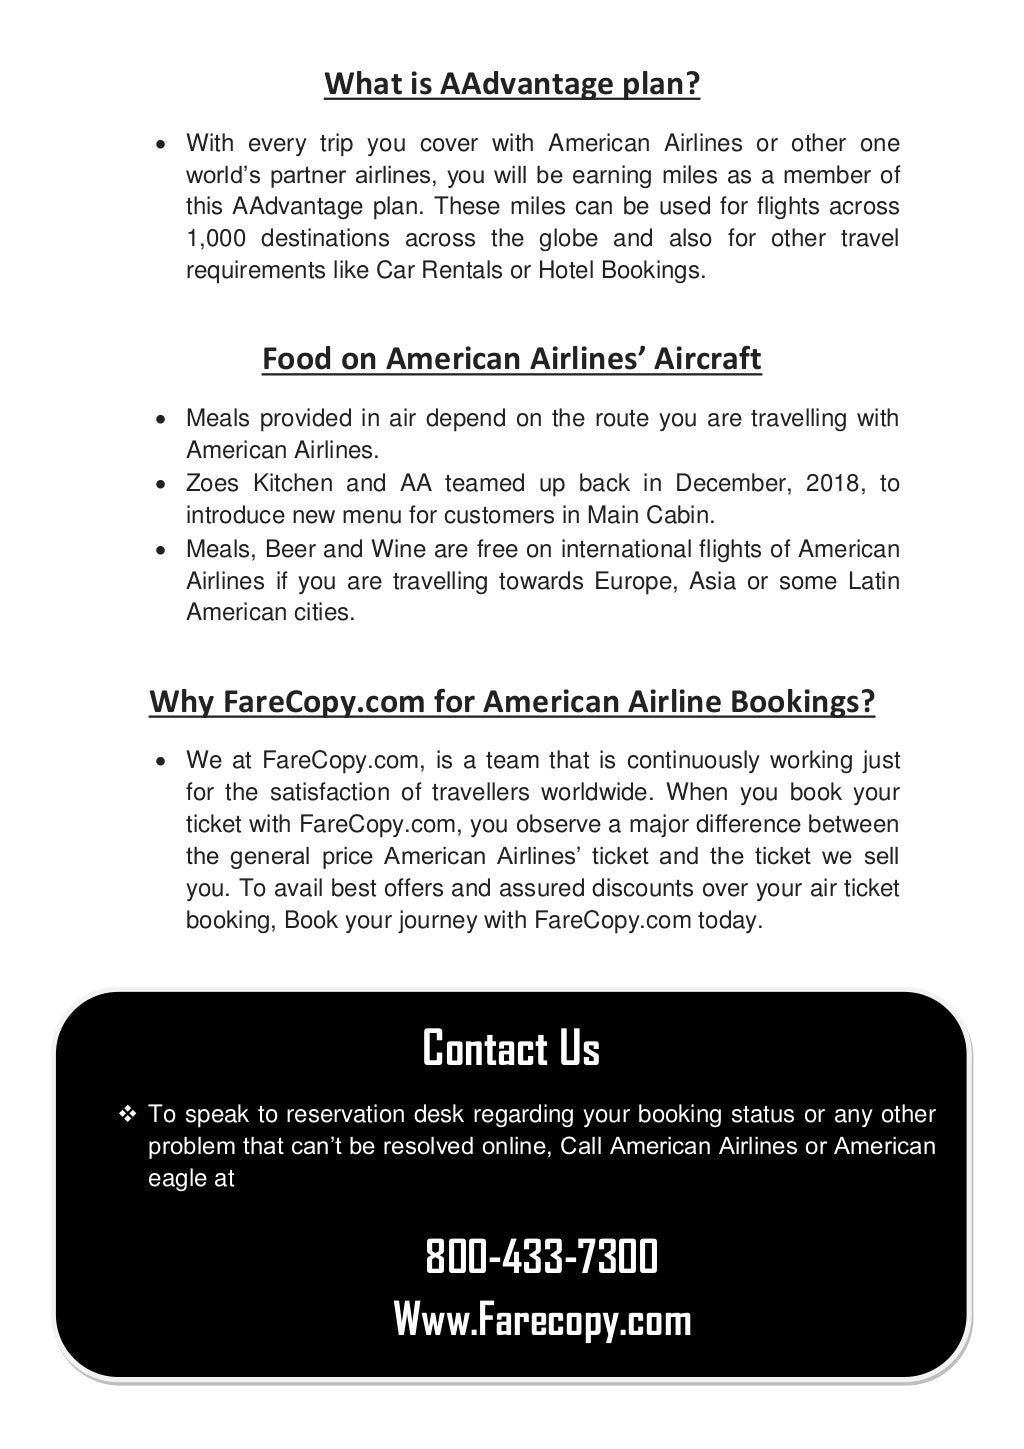 American airlineinformation